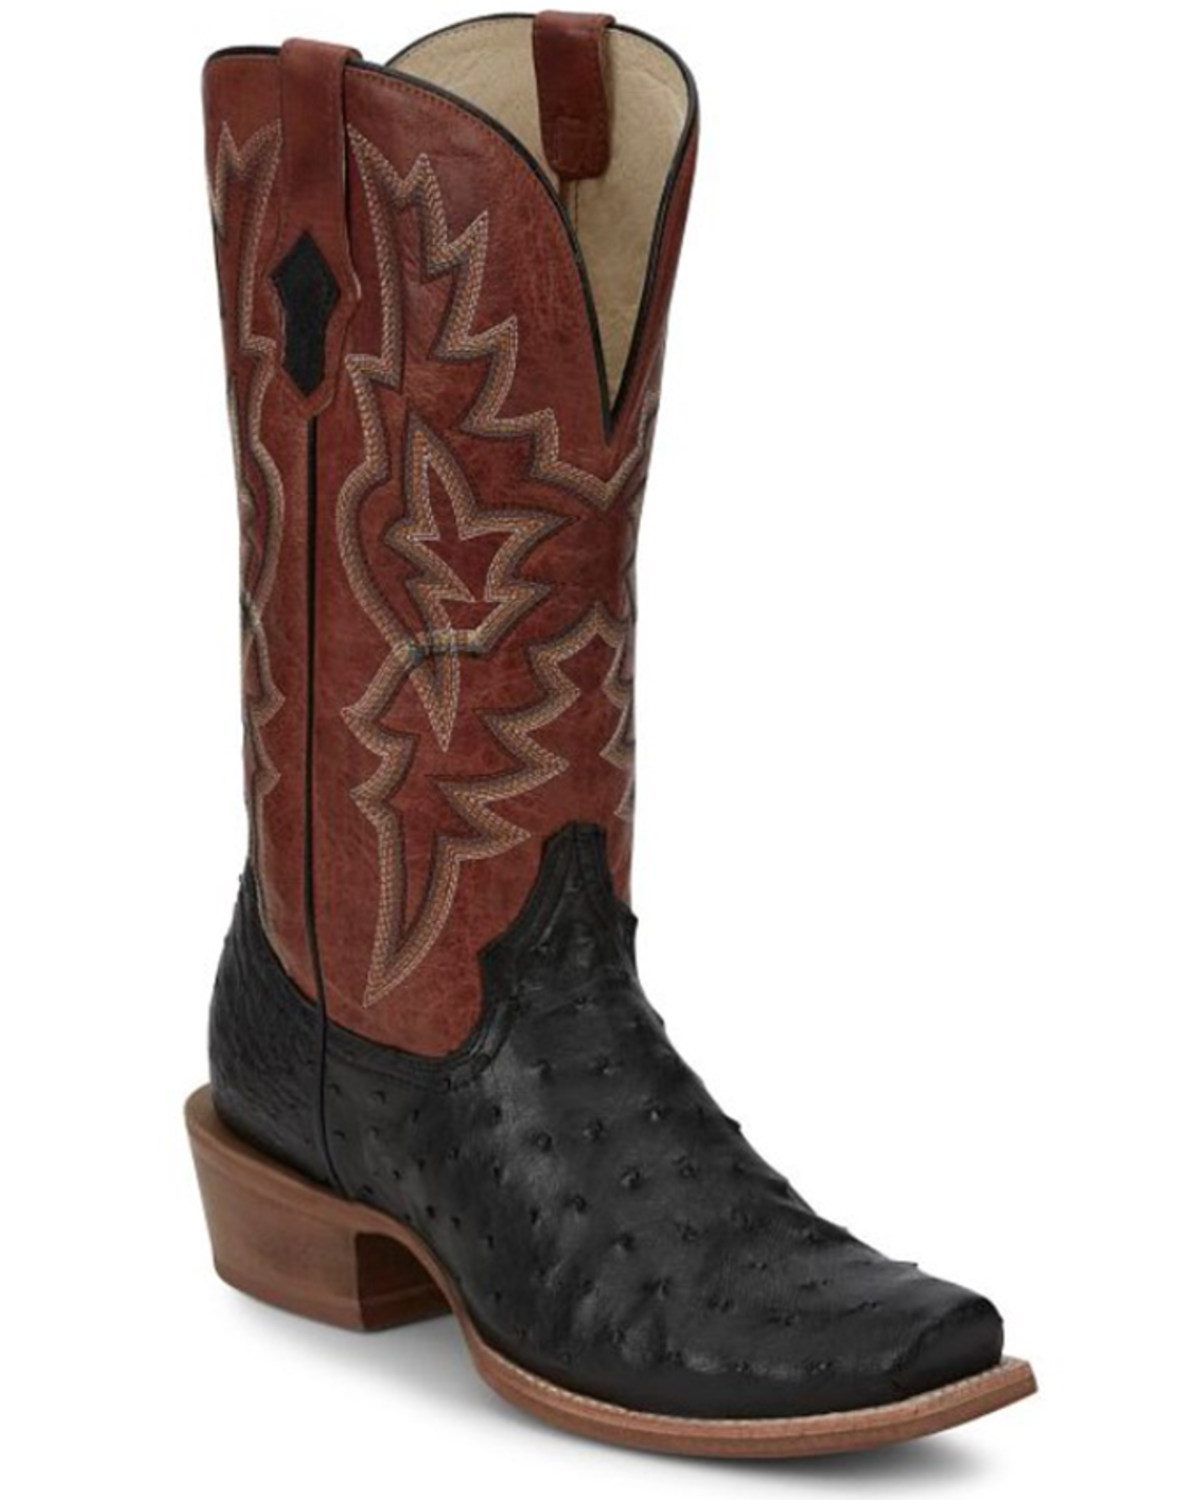 Tony Lama Men's Rylen Full Quill Ostrich Exotic Western Boots - Square Toe